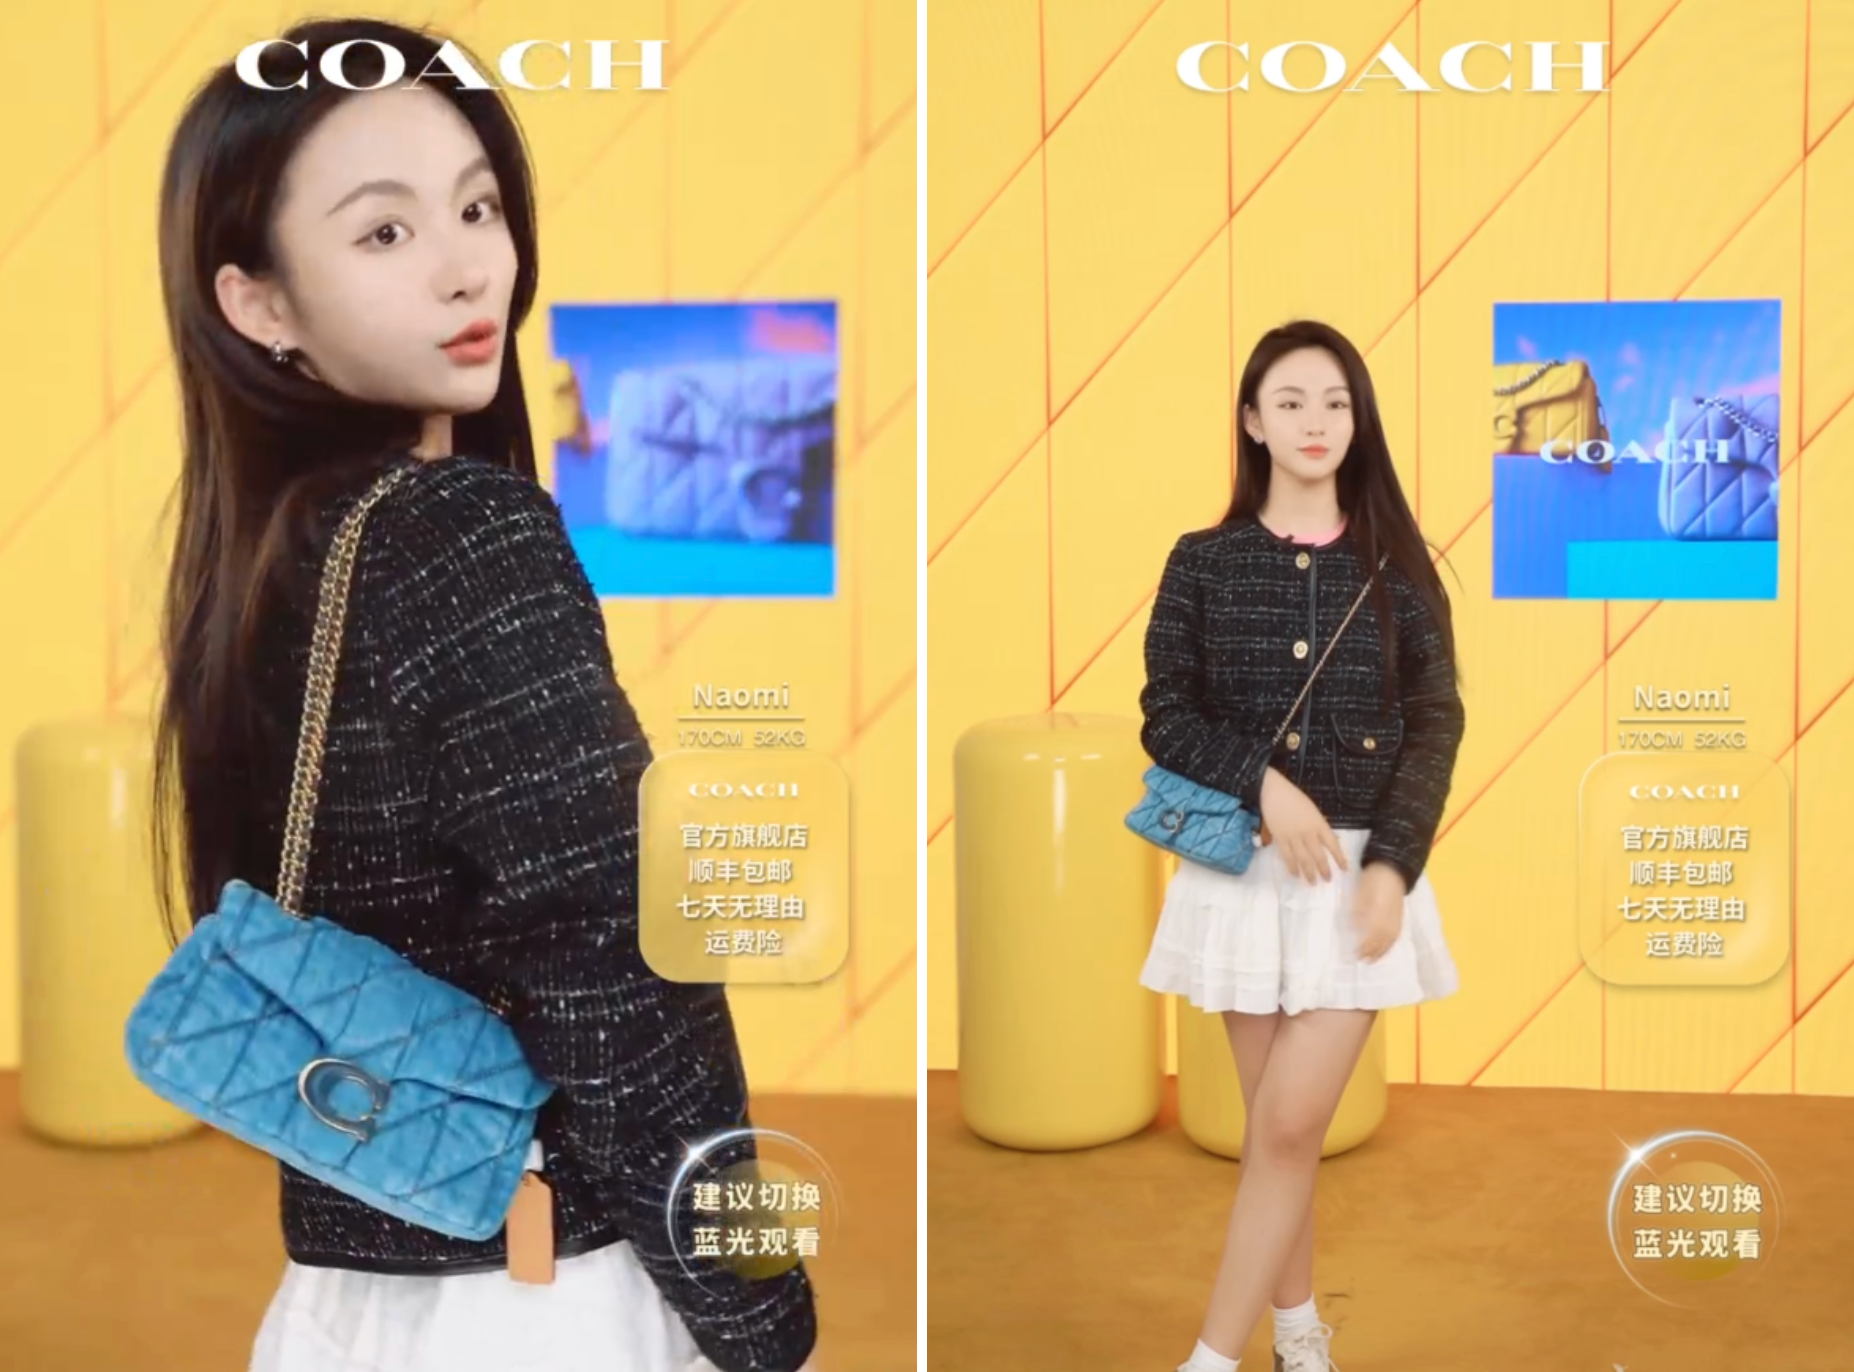 The likes of Coach and Dior are tapping into China's Douyin craze. Photo: Douyin